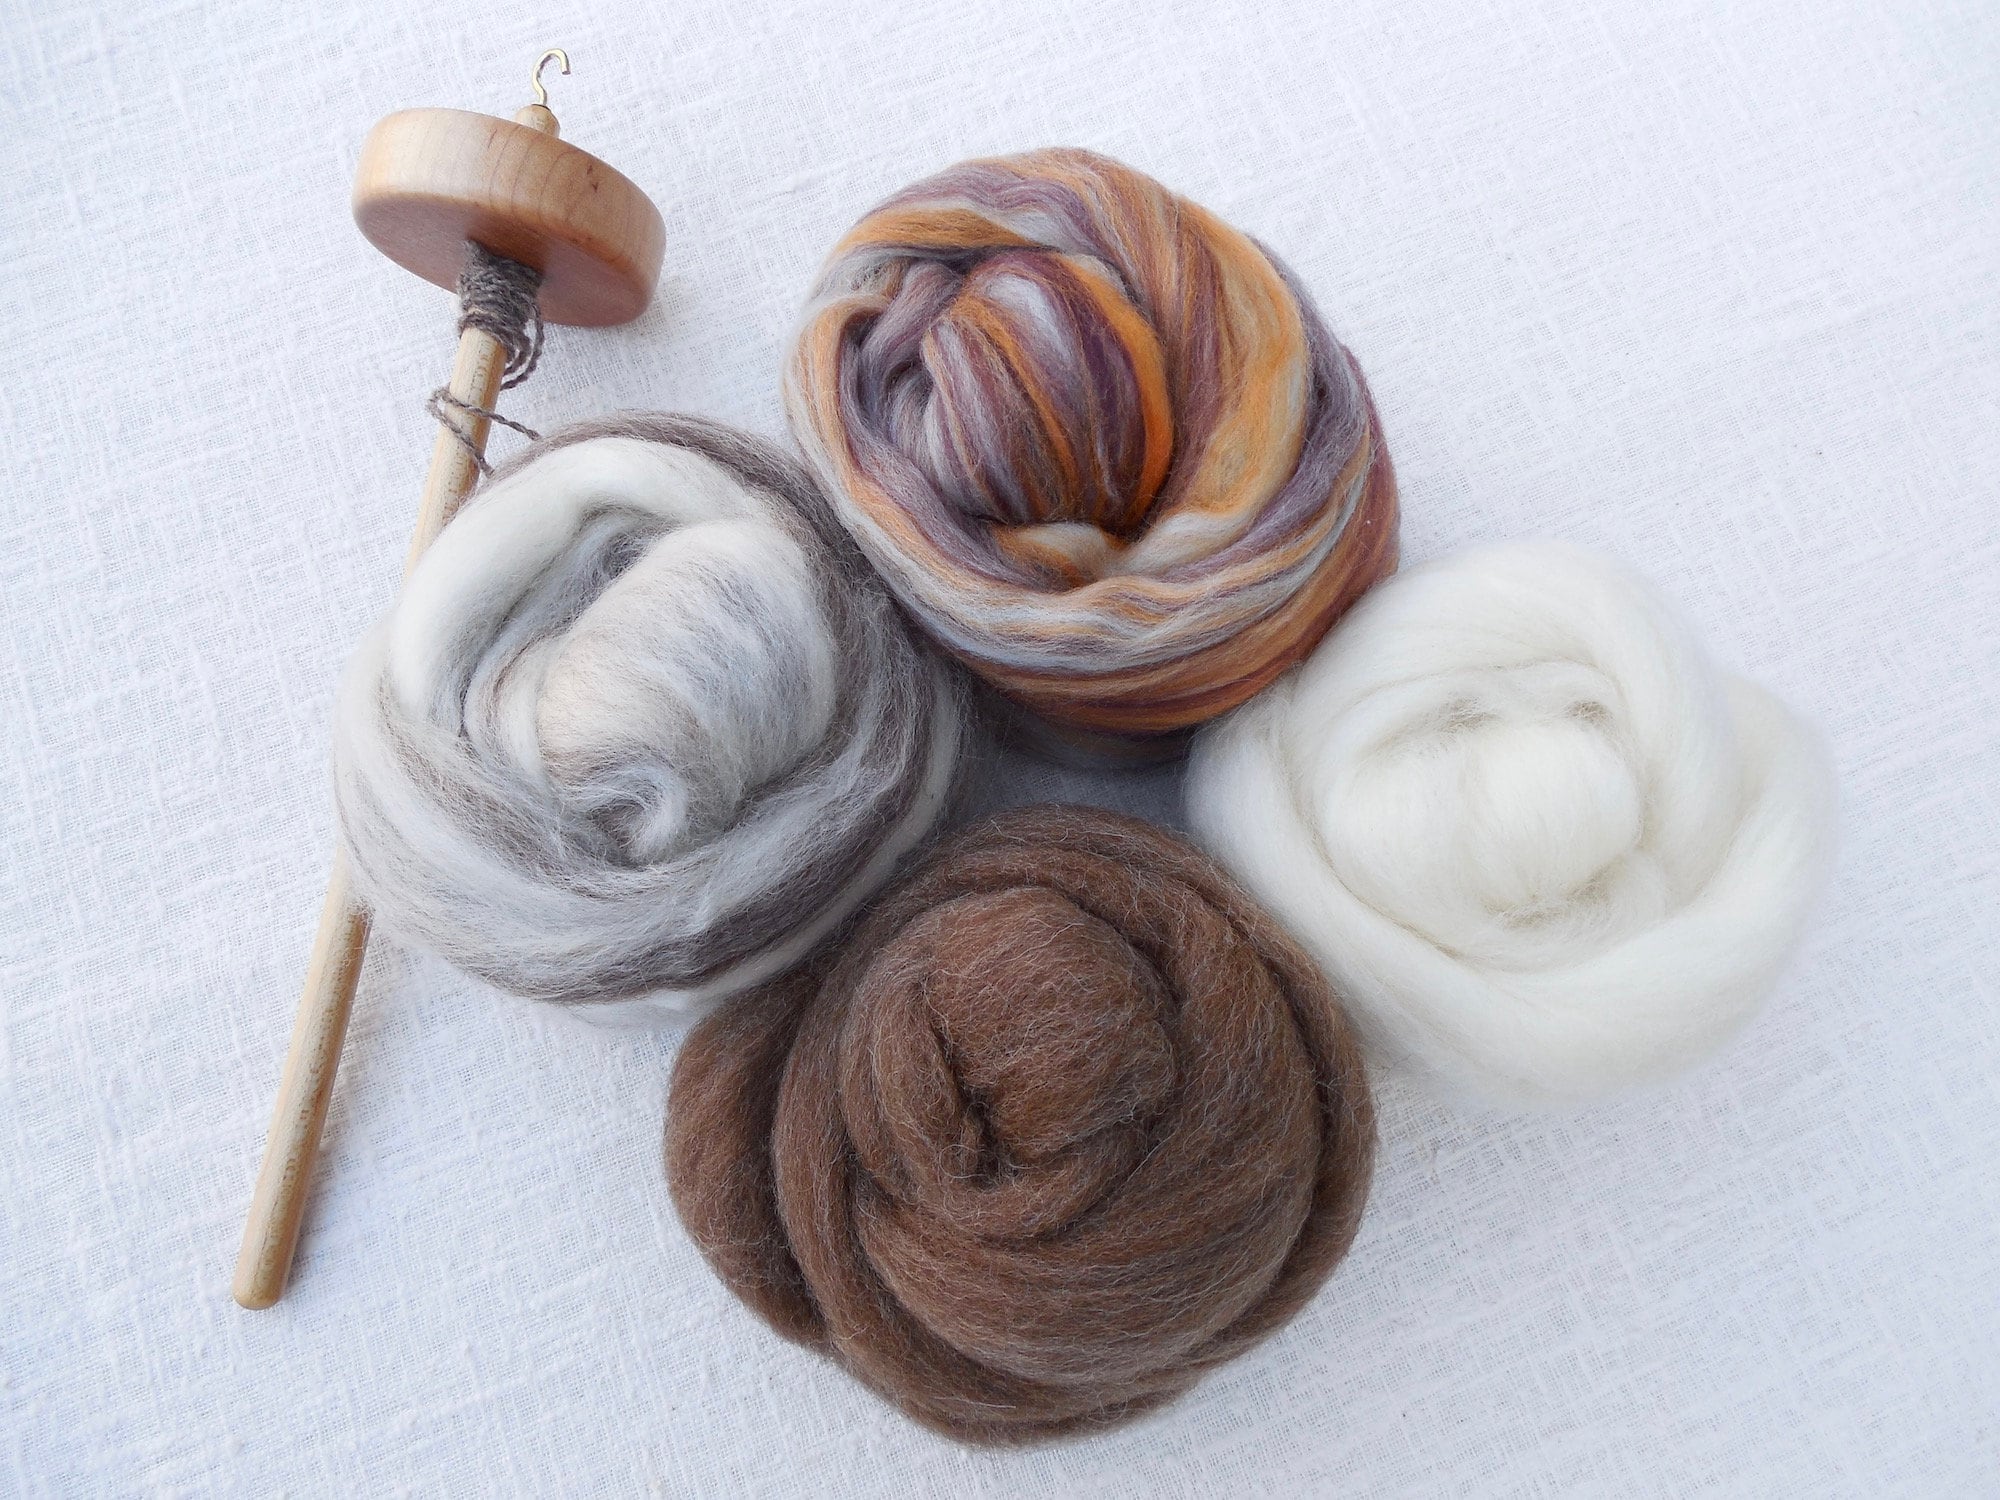  Learn to Spin - Beginner's Spinning Kit with Drop